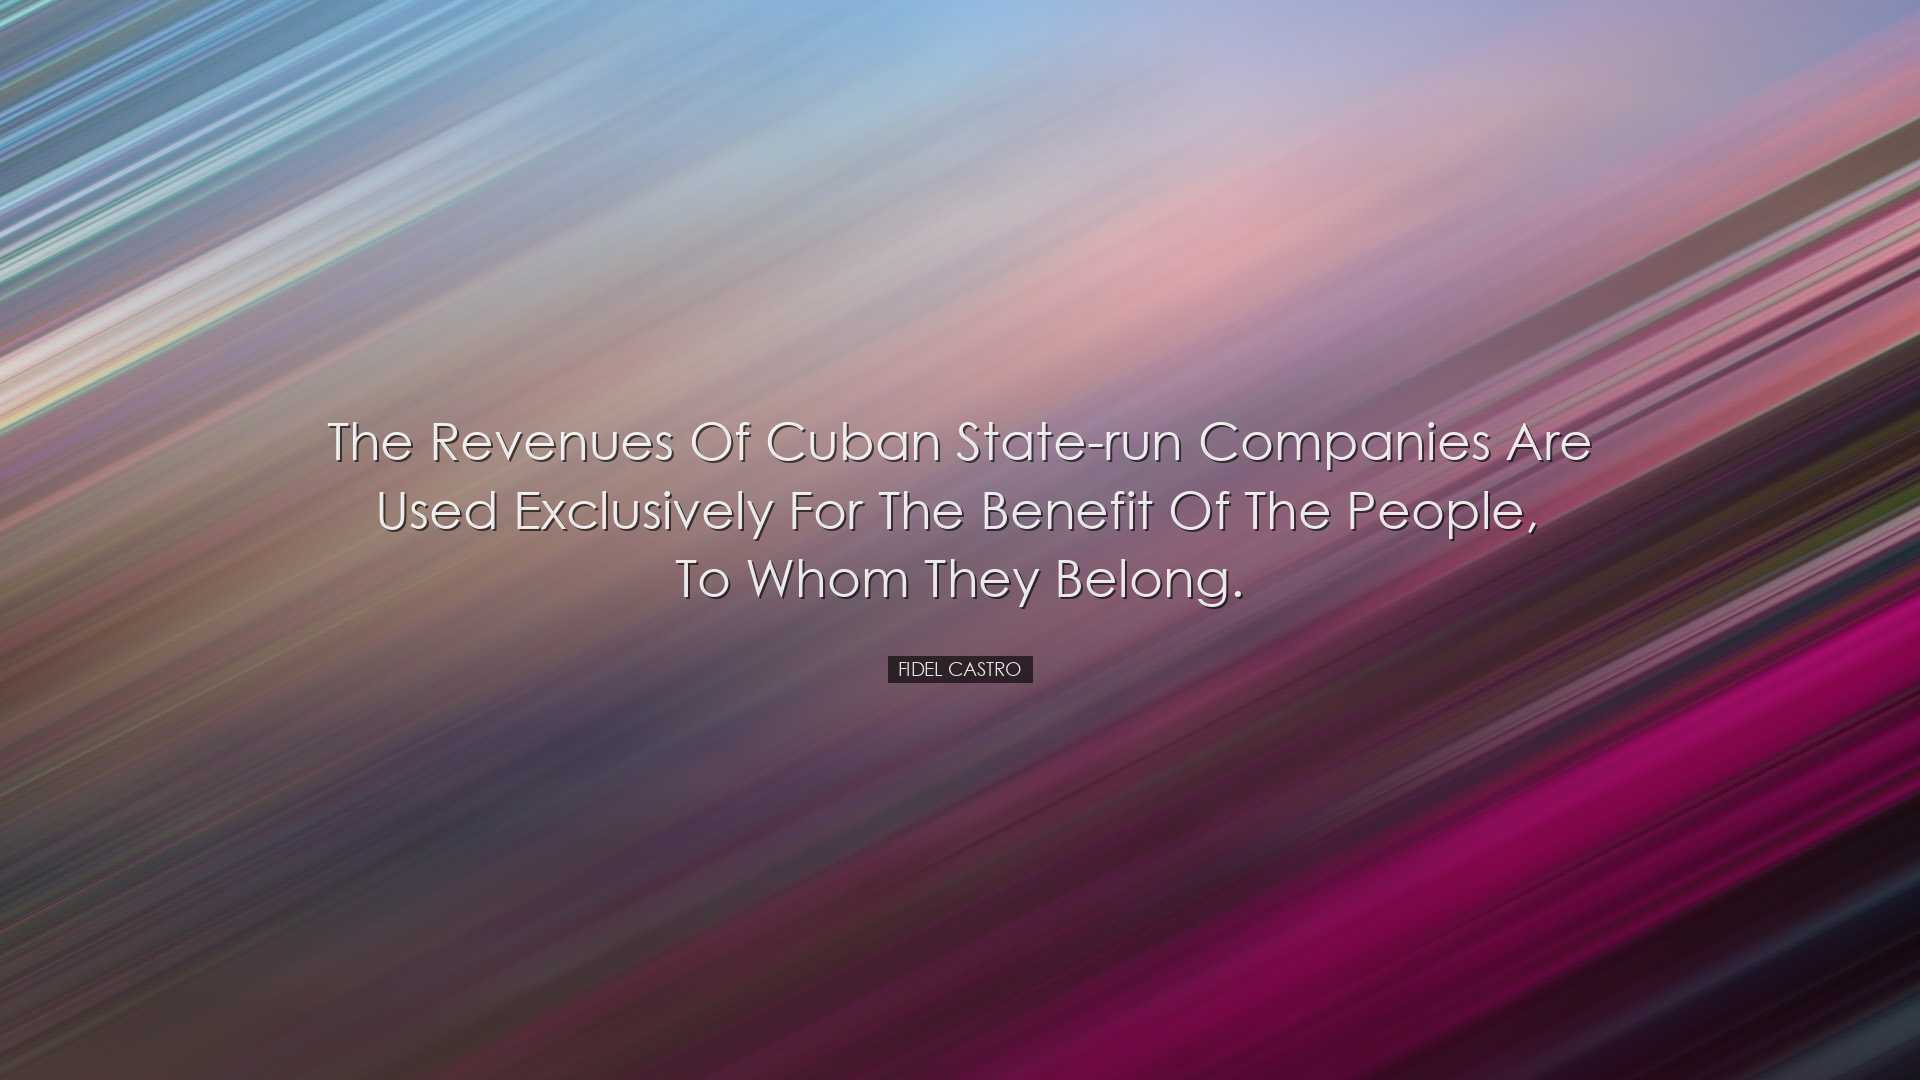 The revenues of Cuban state-run companies are used exclusively for